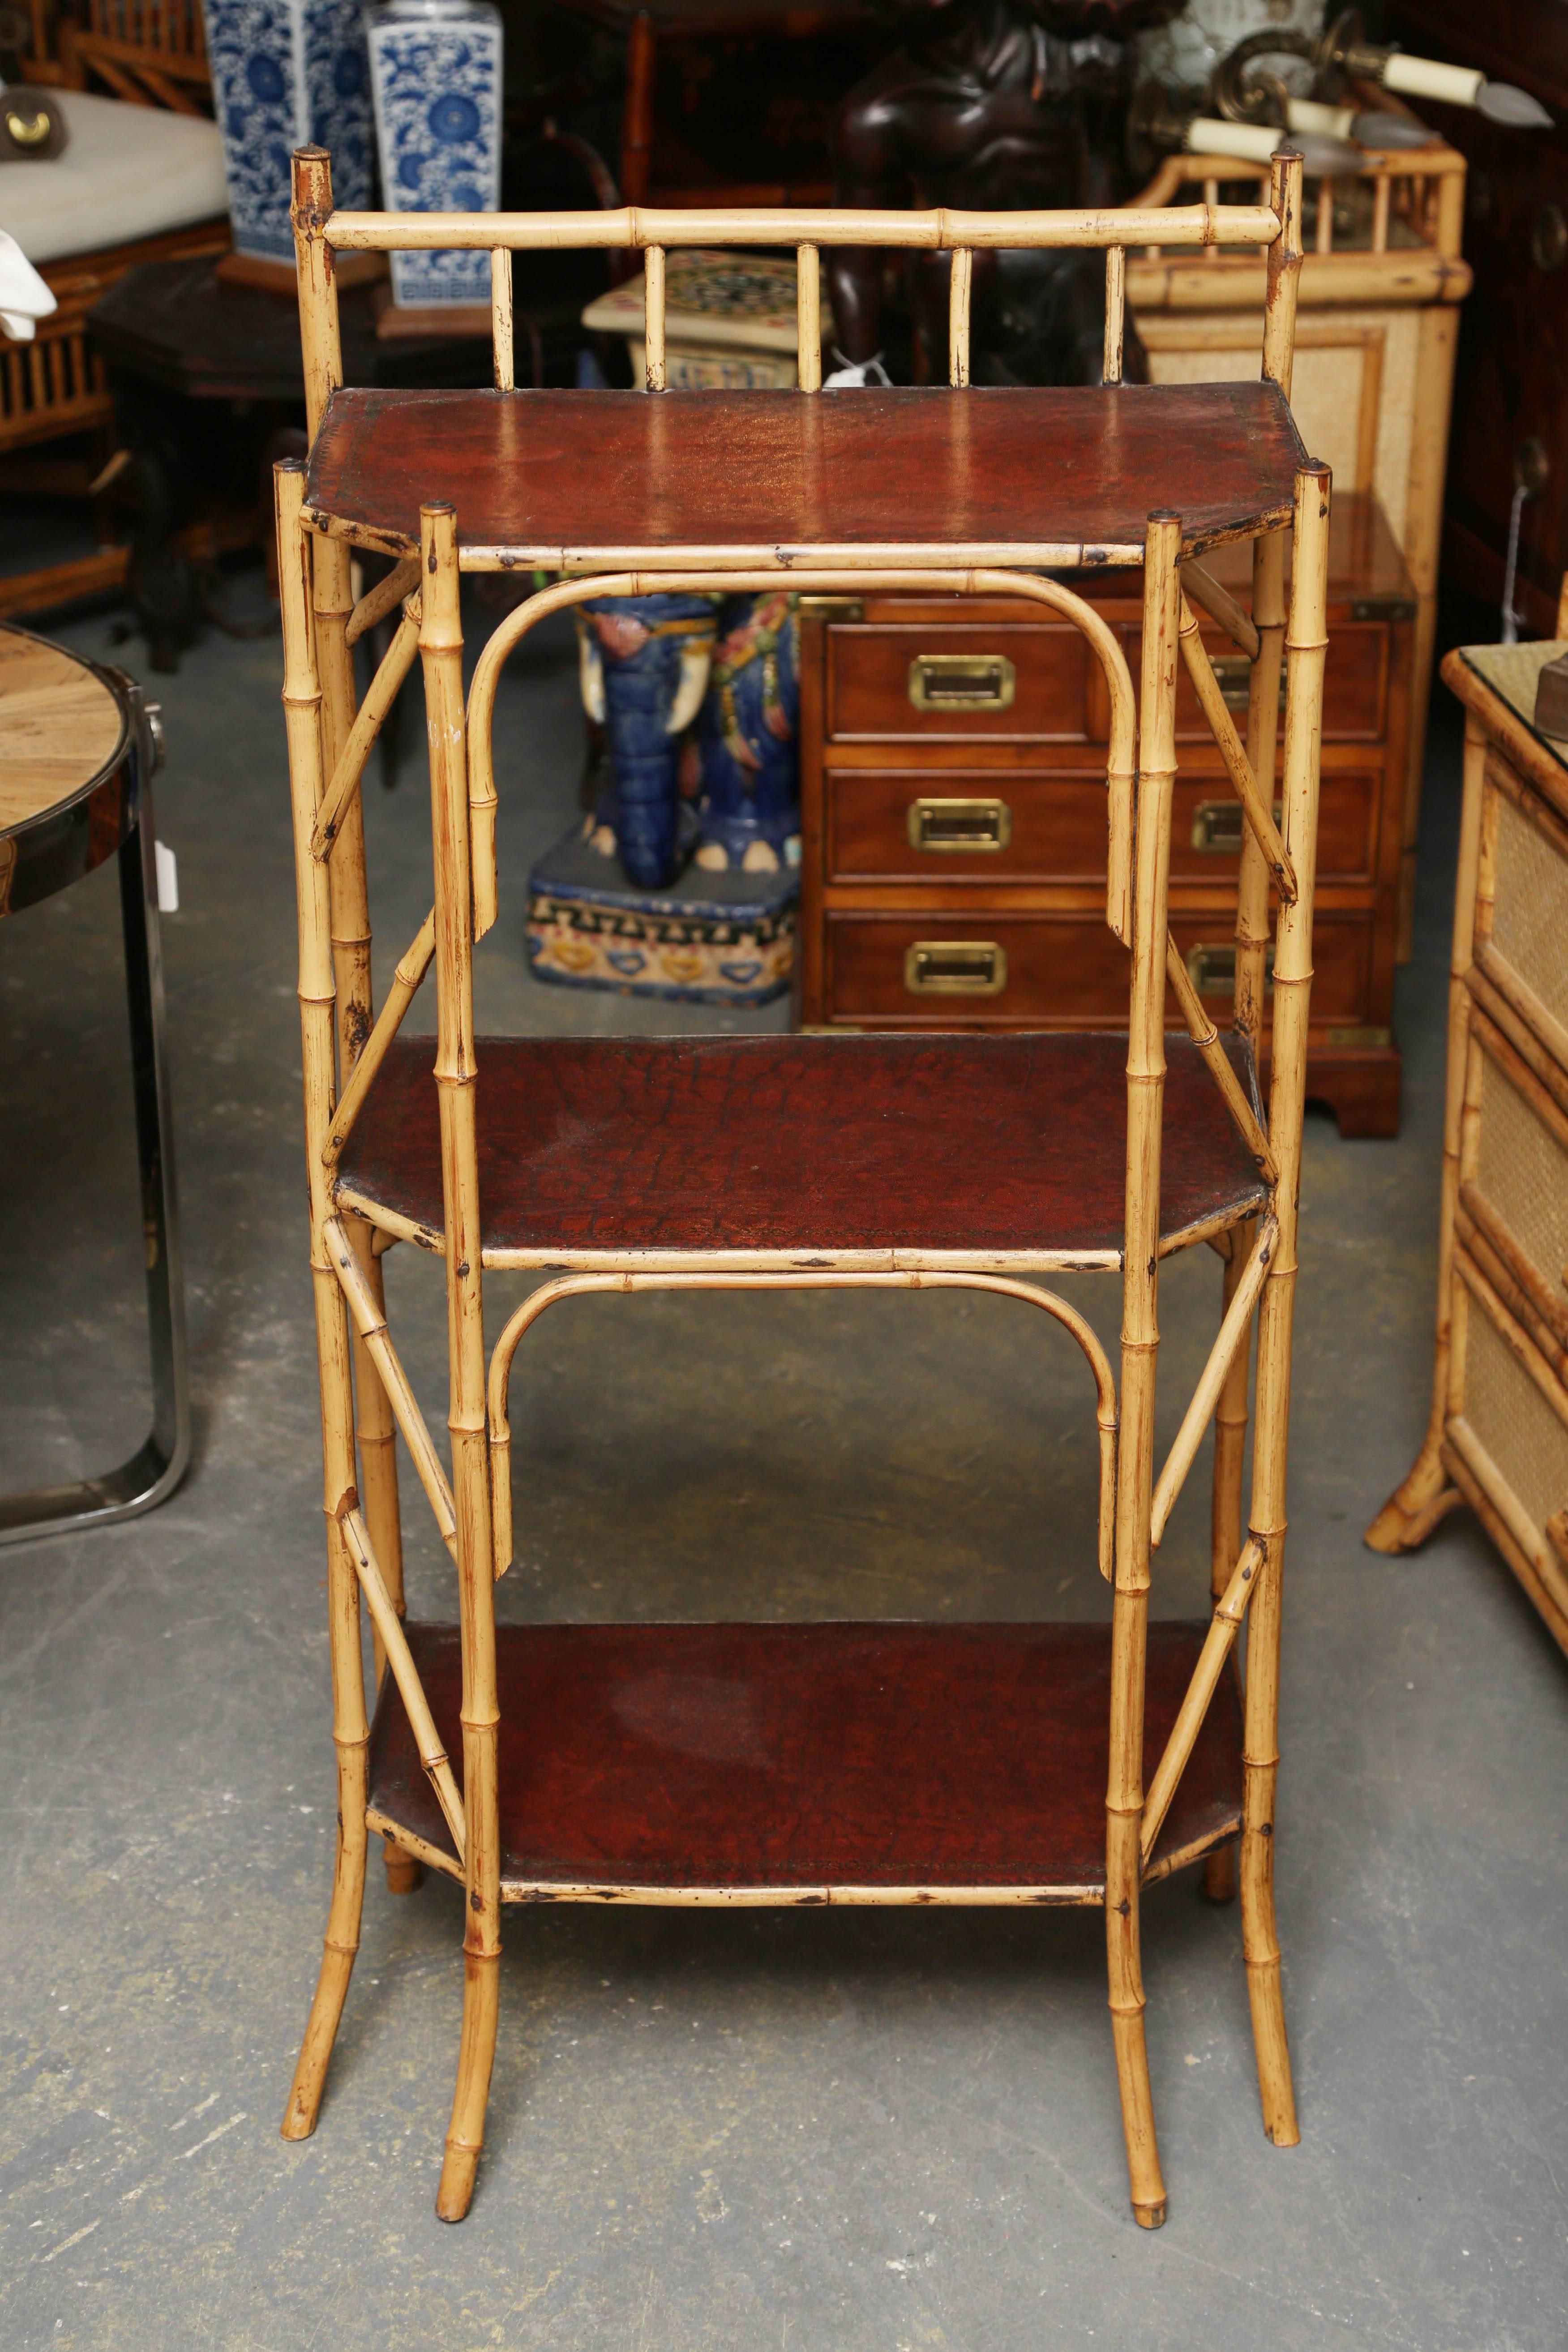 An unusual and fine Edwardian stand with delicate form and embossed leather clad shelves.